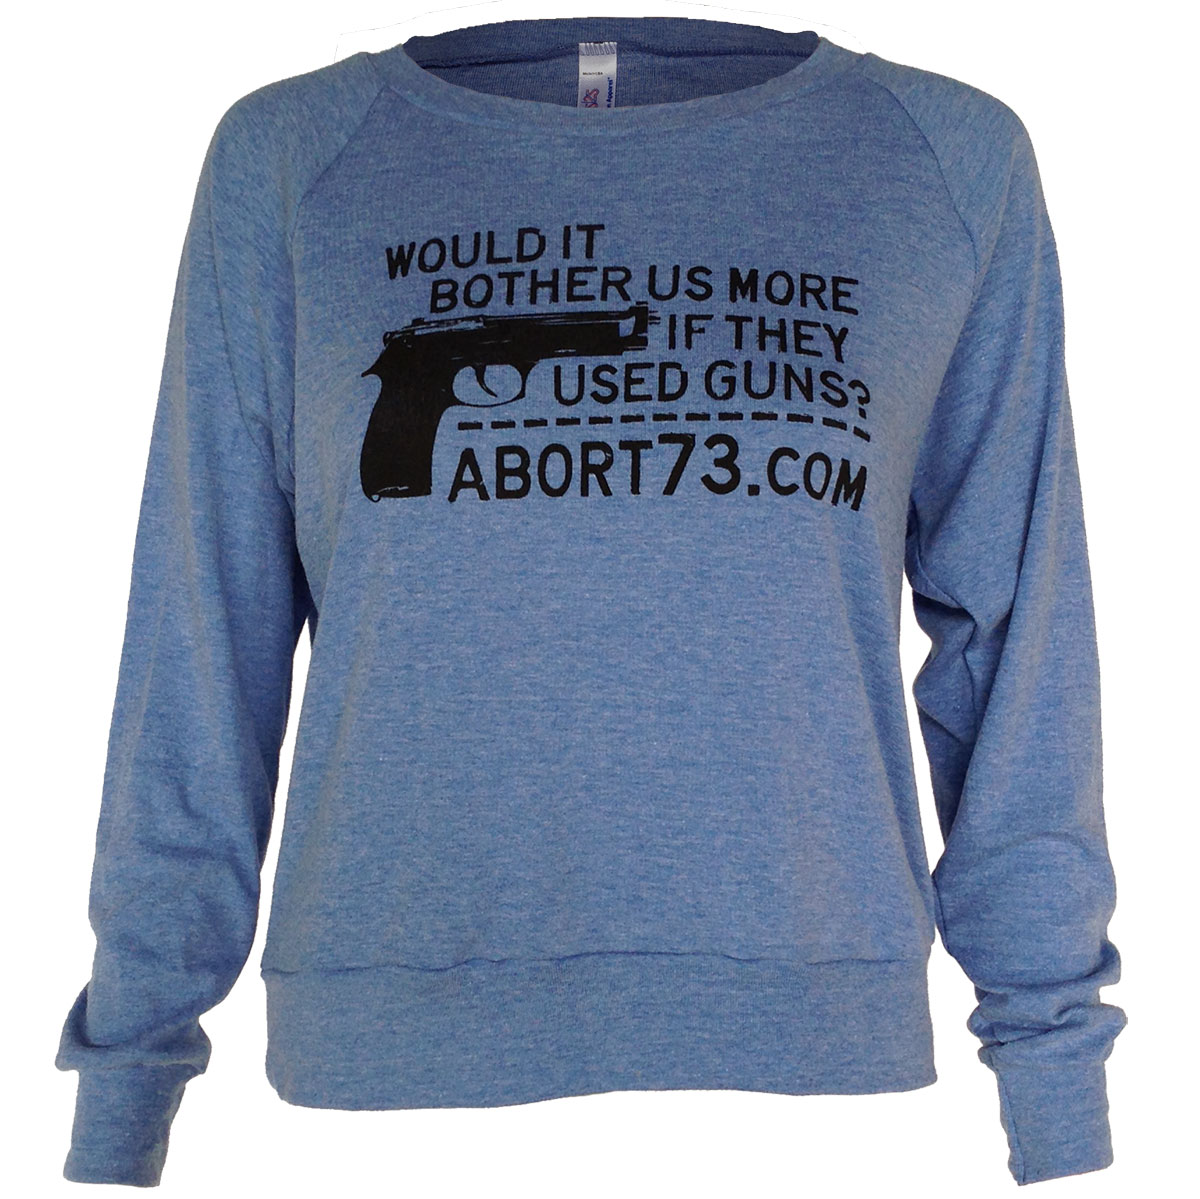 Would it Bother Us More if They Used Guns? (Abort73 Girls Lightweight Pullover)